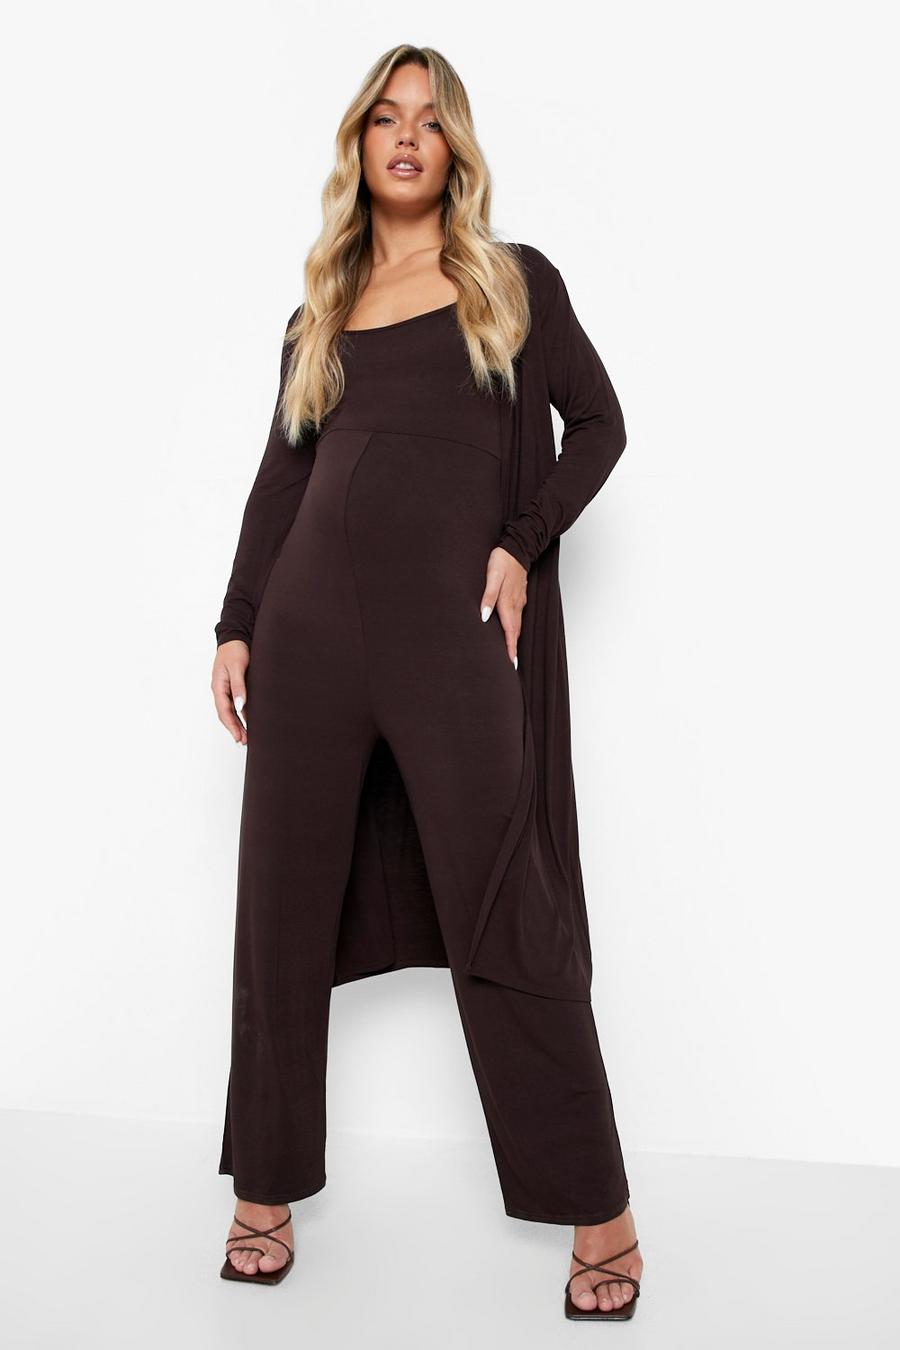 Chocolate brun Maternity Slouchy Jumpsuit And Duster